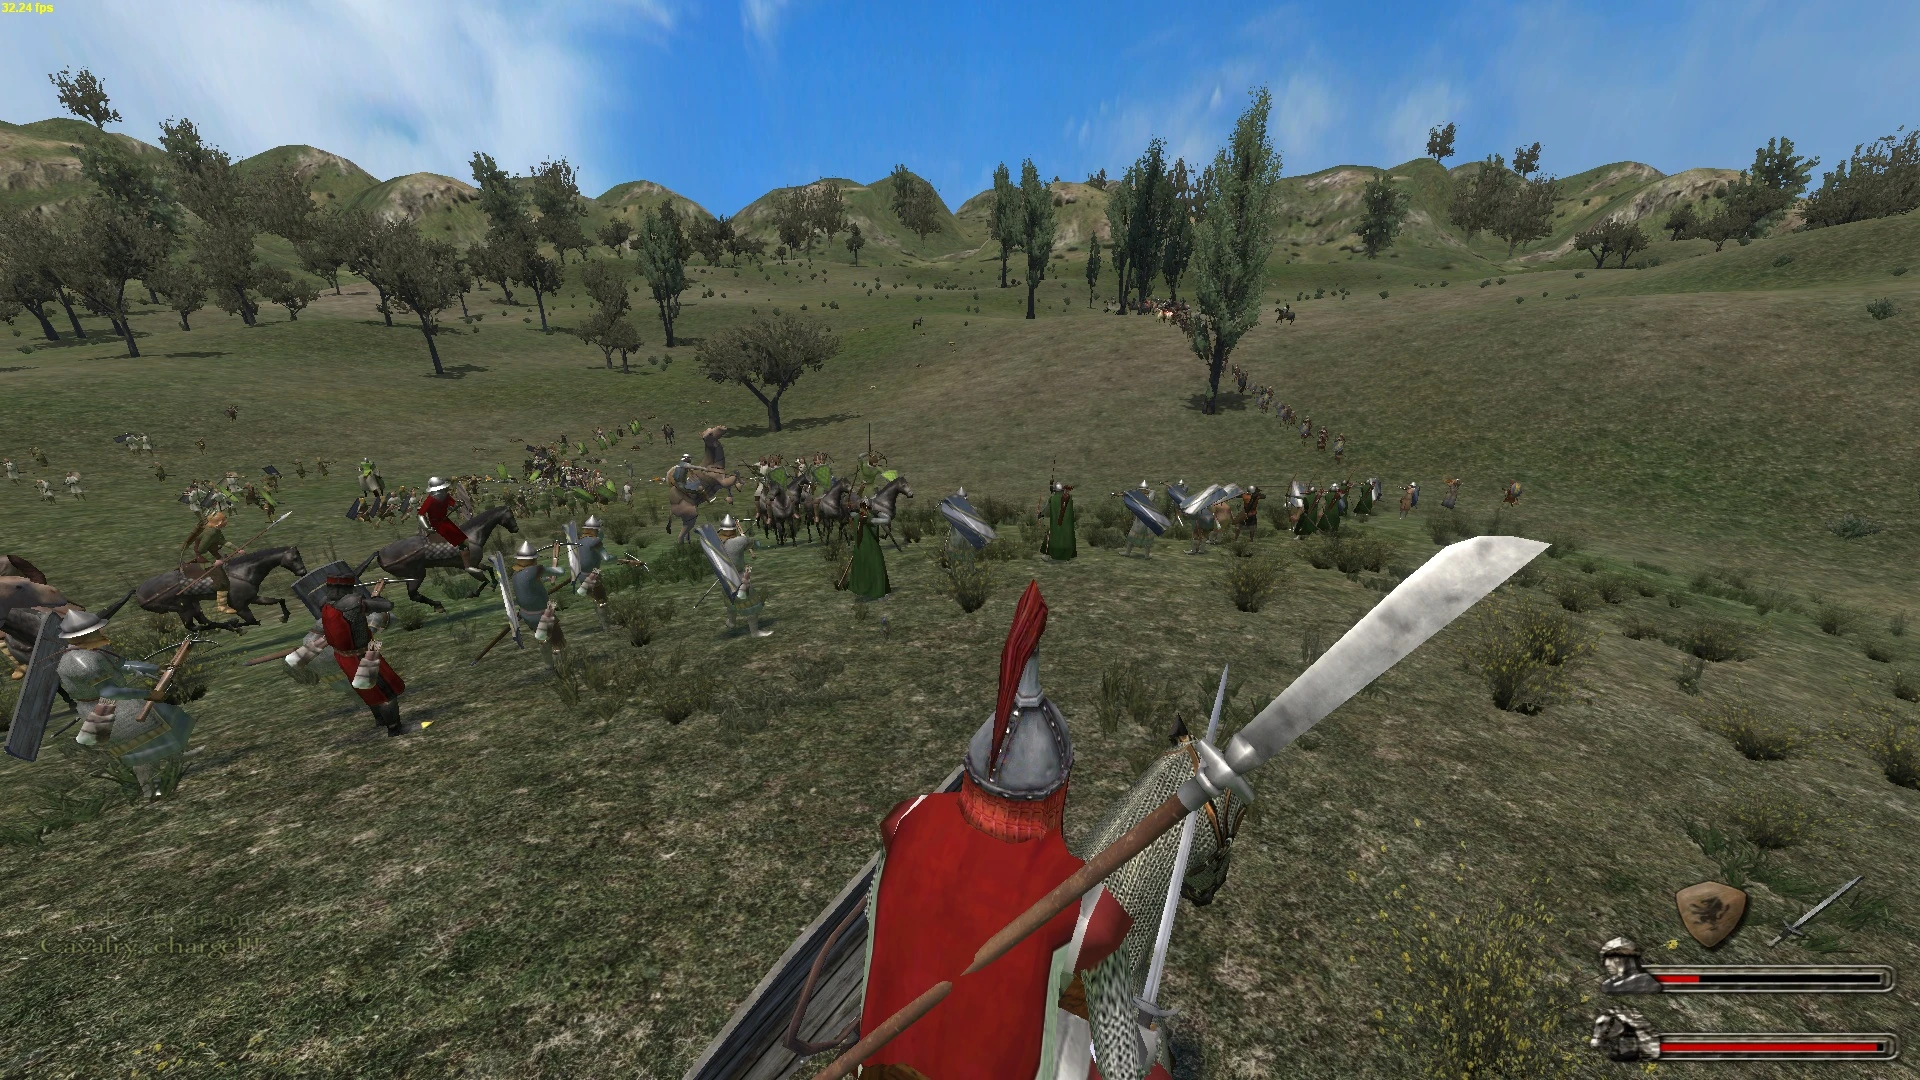 Warband perisno. Mount and Blade 1. Mount and Blade 1.011. Mount & Blade Перисно. Маунт блейд Sword of Damocles.